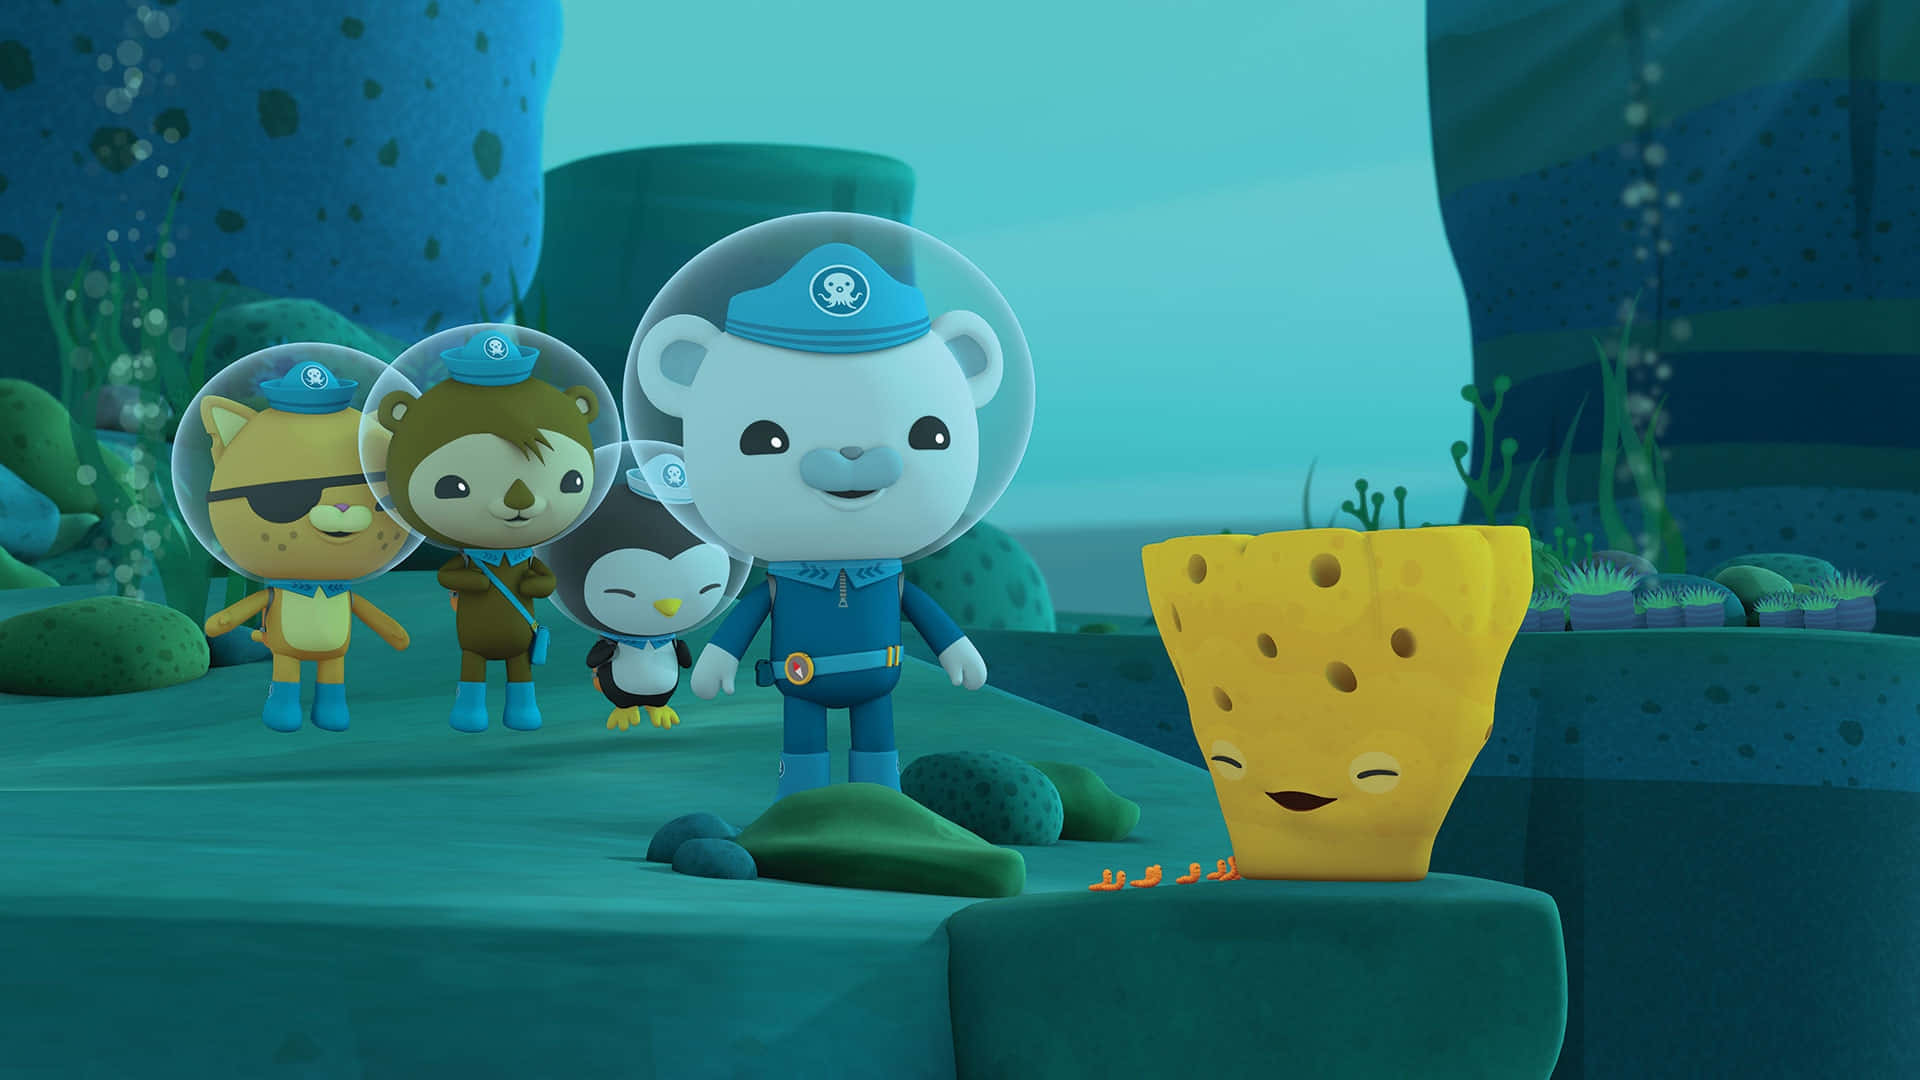 Join the Octonauts on the adventure of a lifetime! Wallpaper